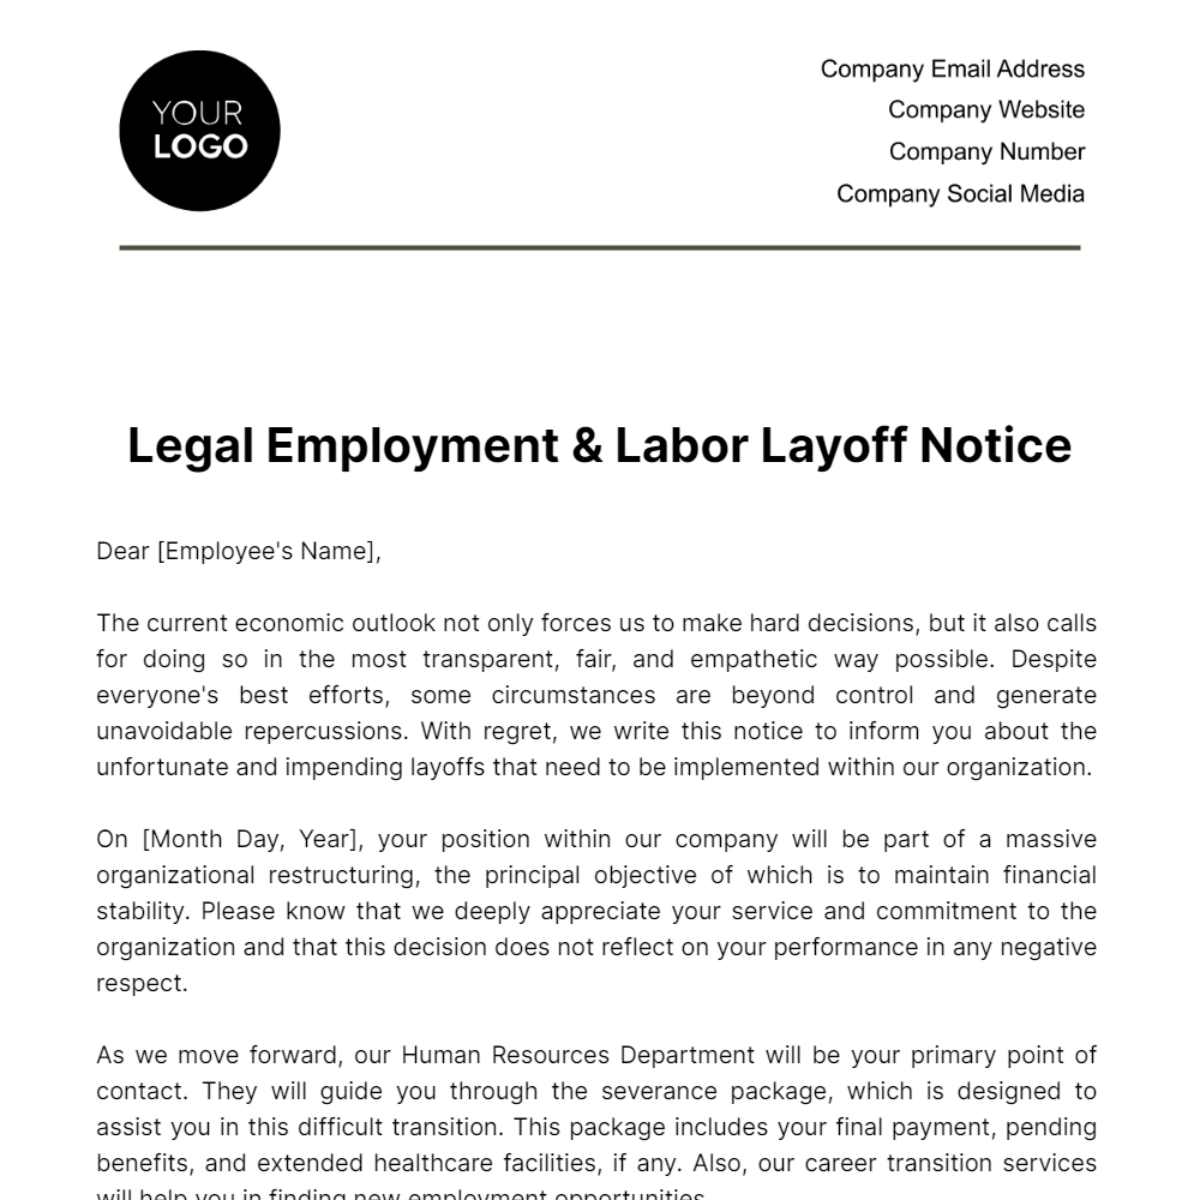 Free Legal Employment & Labor Layoff Notice Template